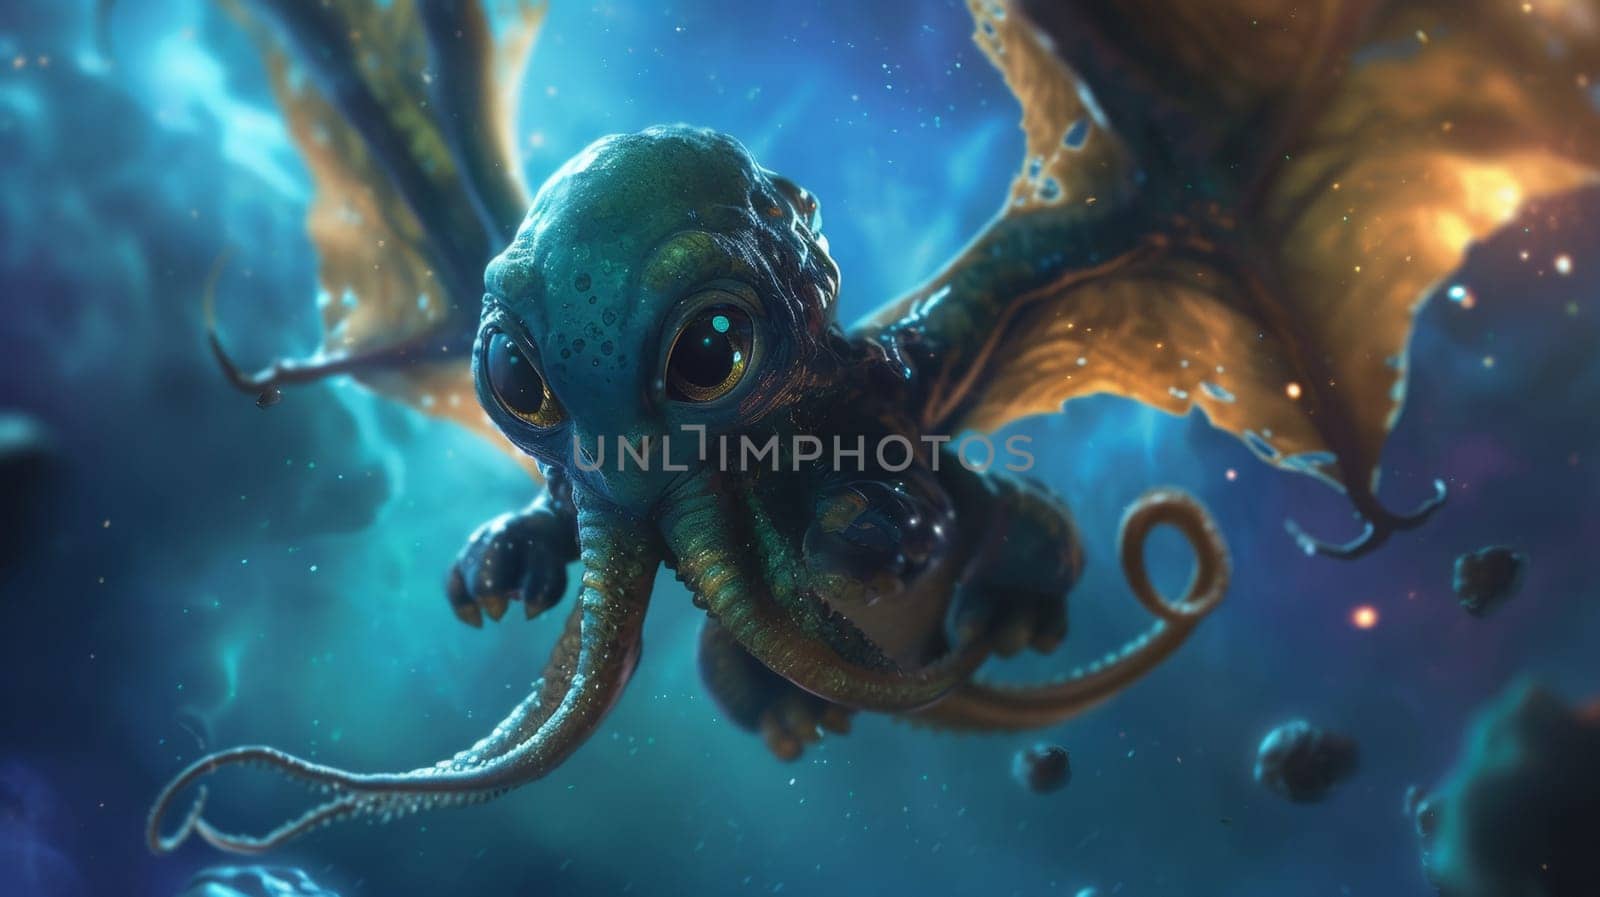 A close up of a dragon with large eyes and long tentacles, AI by starush